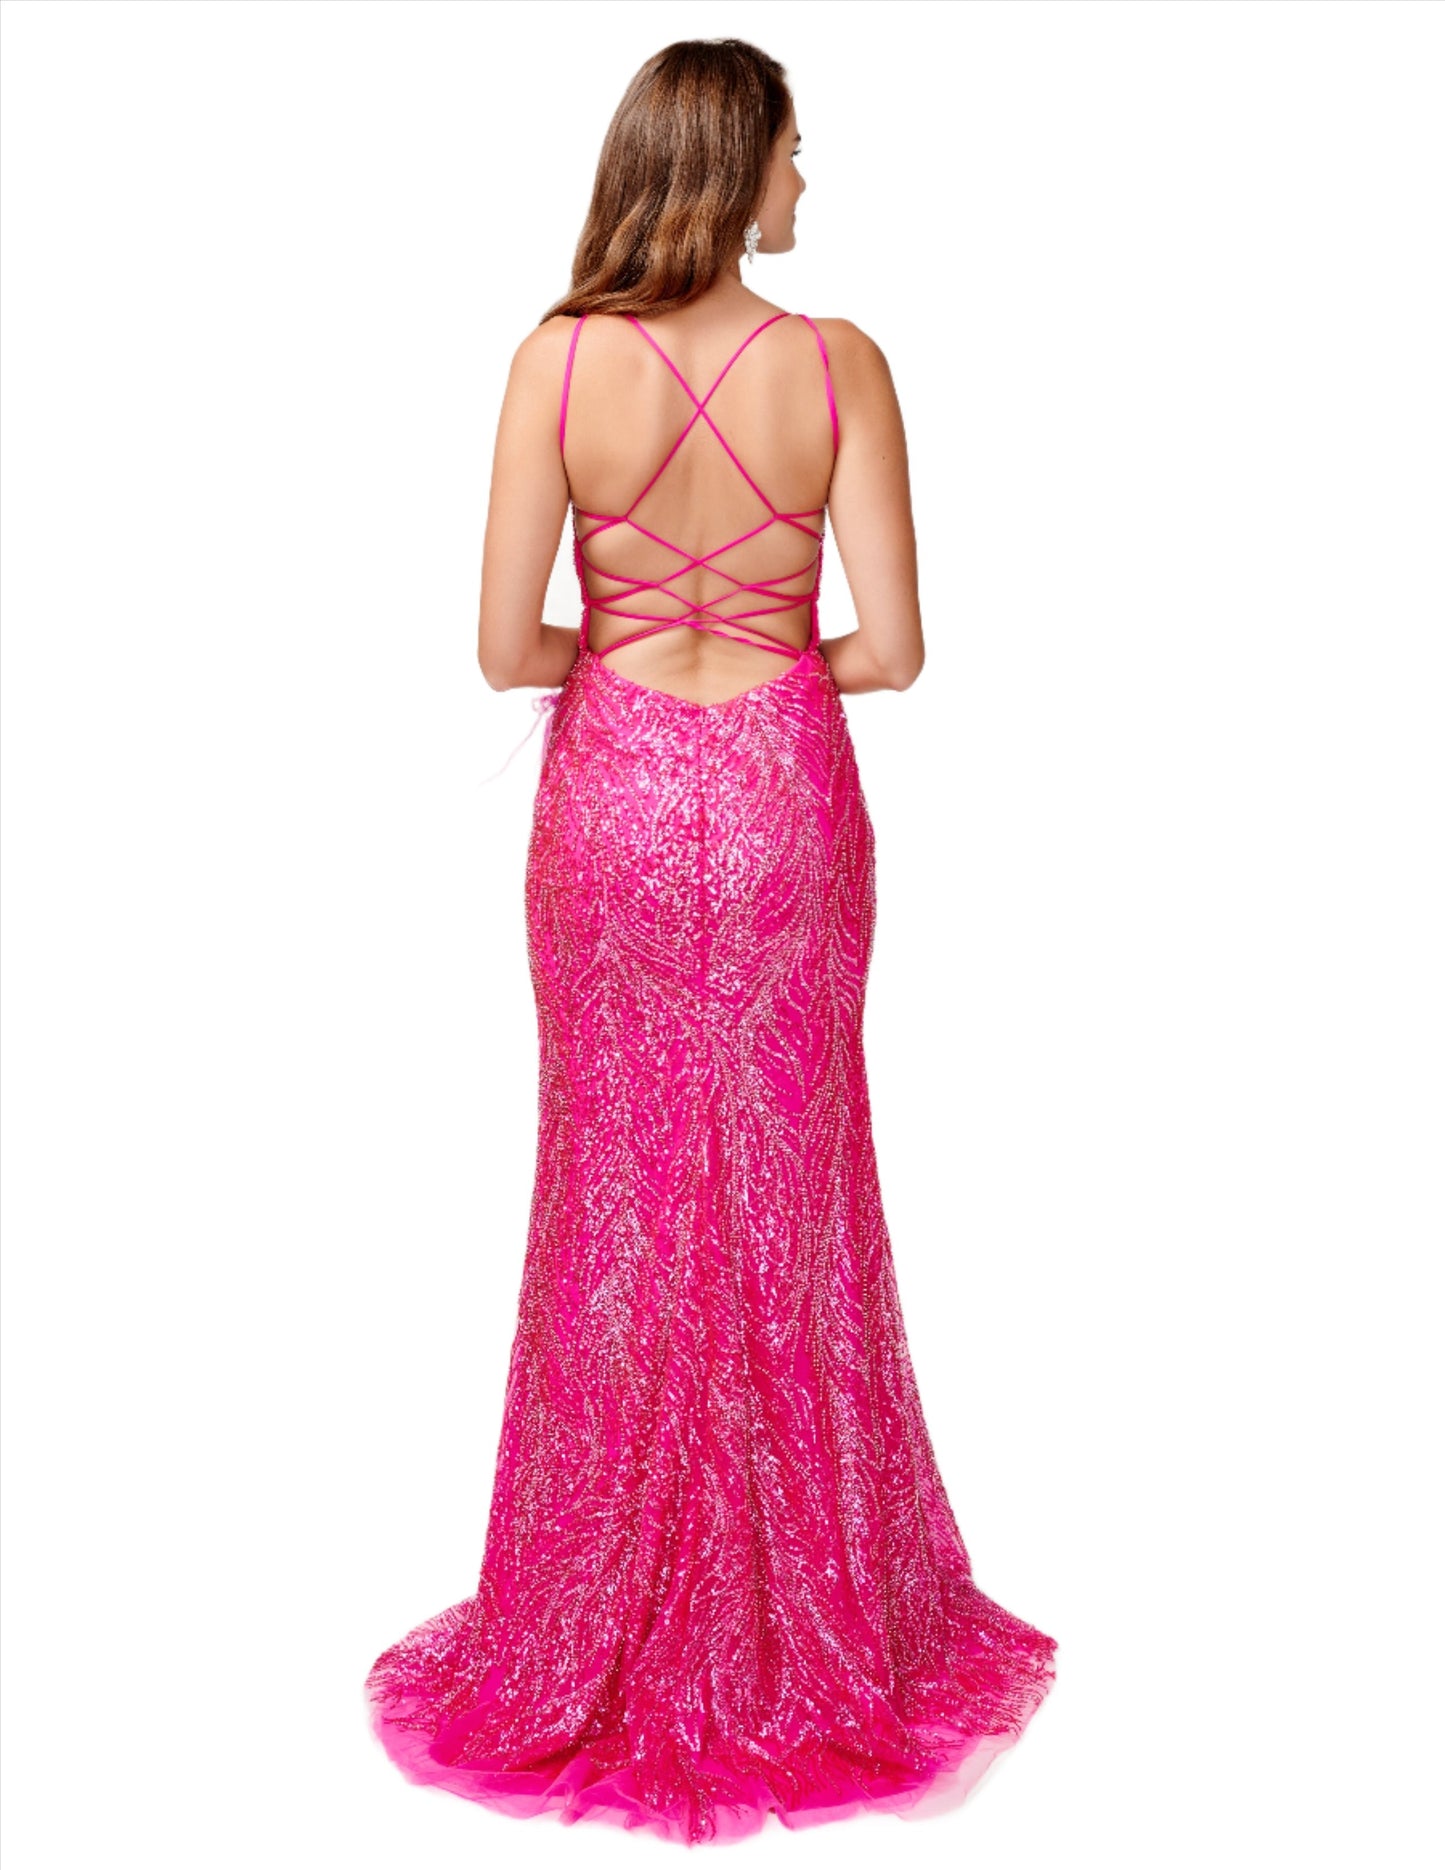 <p data-mce-fragment="1">This Nina Canacci 9158 formal dress features delicate beaded feather details, a backless design, a corset bodice, and a high front slit. The sheer fabric adds a touch of elegance to this stunning gown. Perfect for any formal event, this dress is sure to make a statement.</p> <p data-mce-fragment="1">Sizes: 0-8</p> <p data-mce-fragment="1">Colors: Flamingo</p>